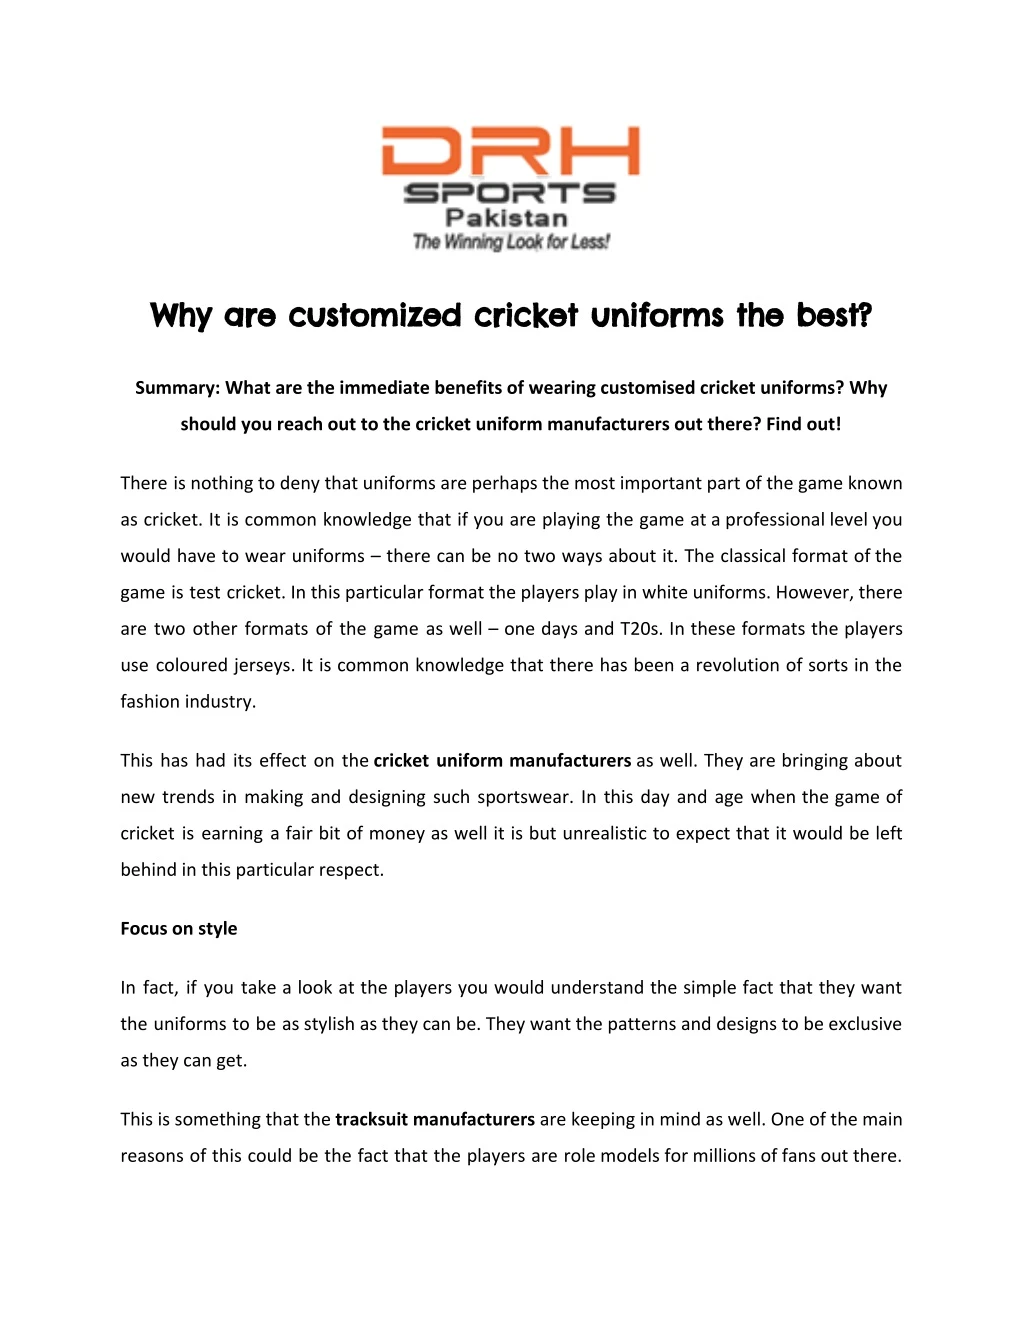 why are customized cricket uniforms the best